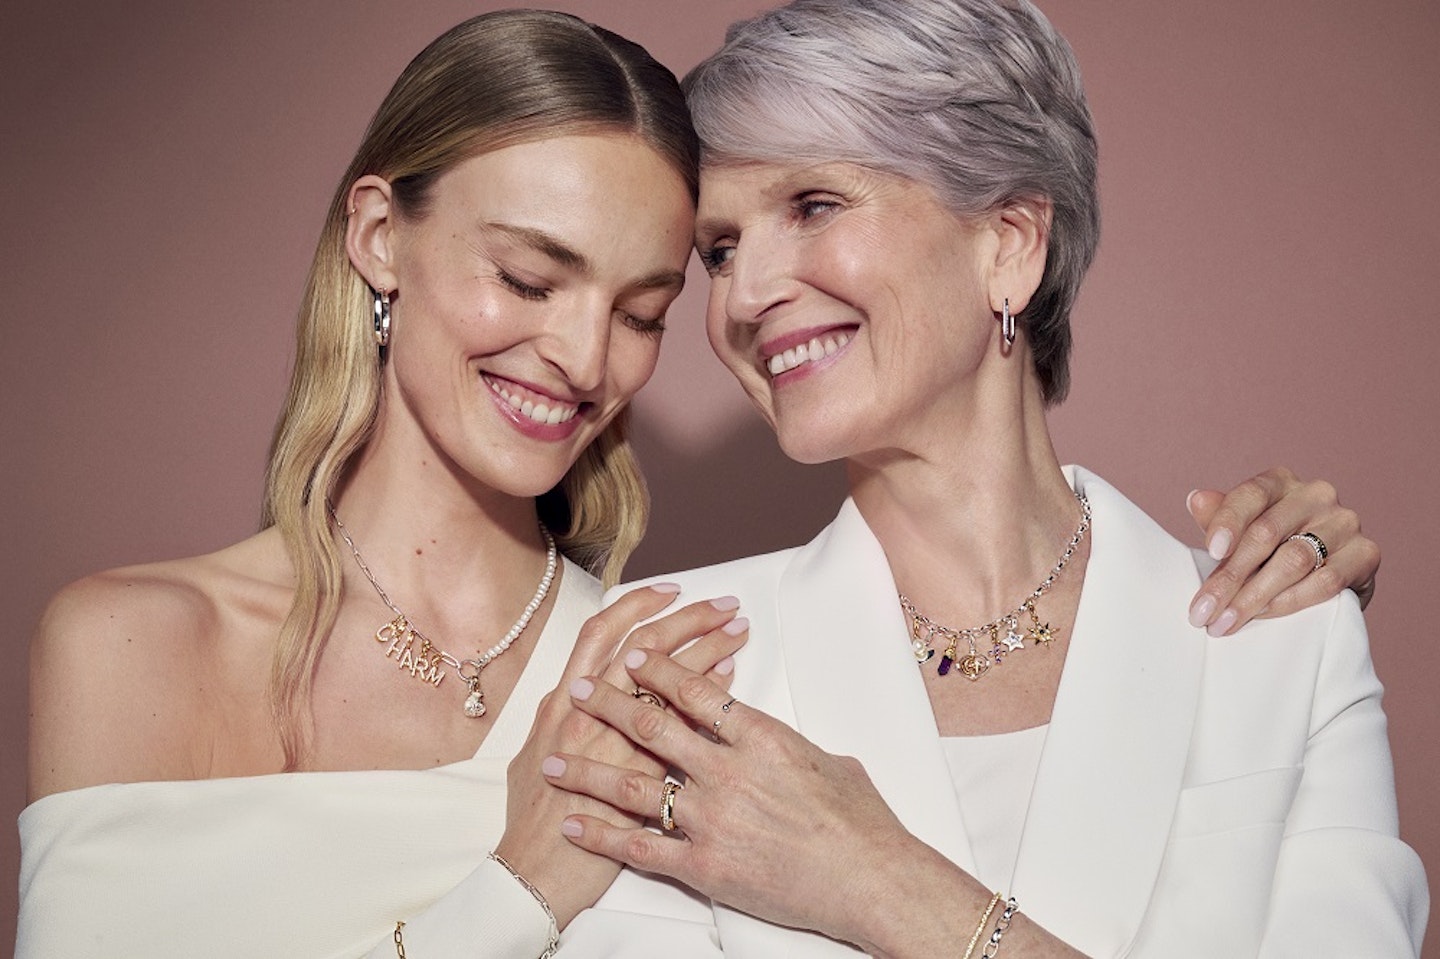 Thomas Sabo Mother's Day gifts